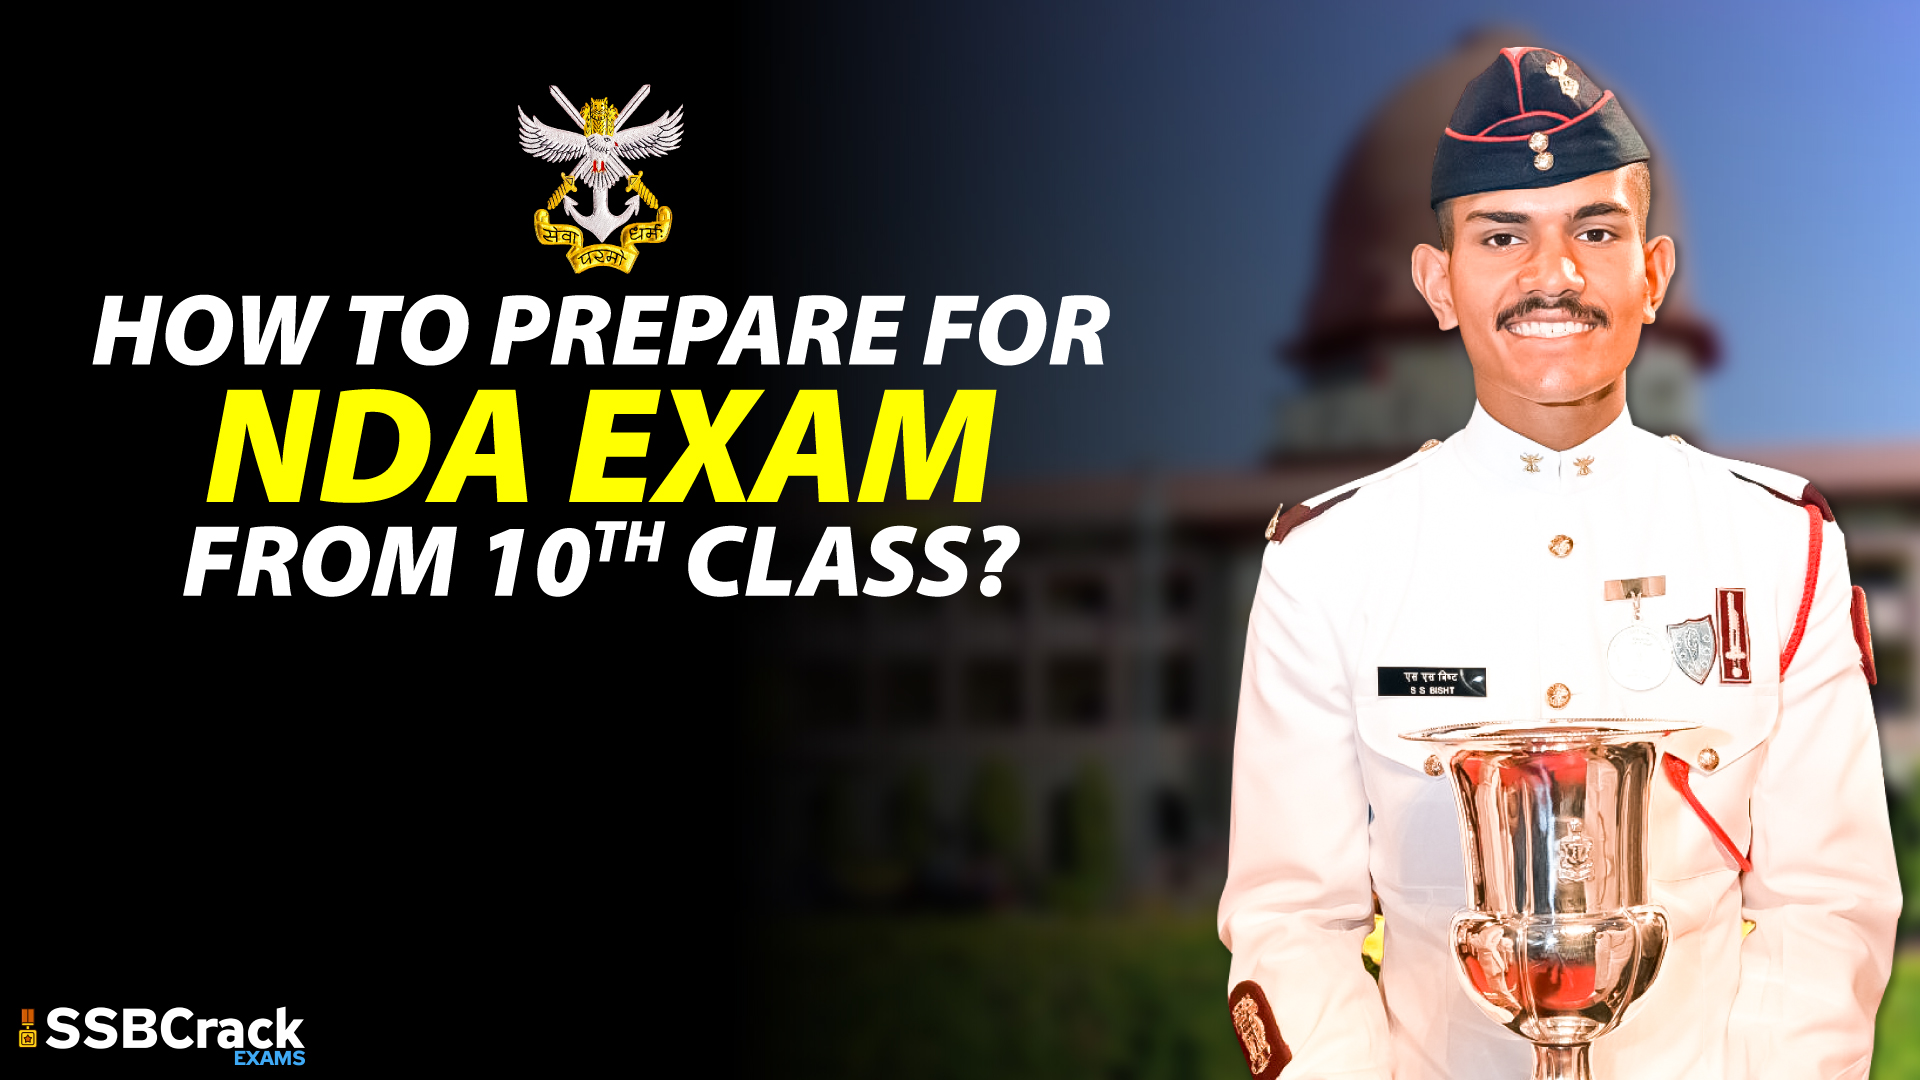 How To Prepare For NDA Exam After Class 10?